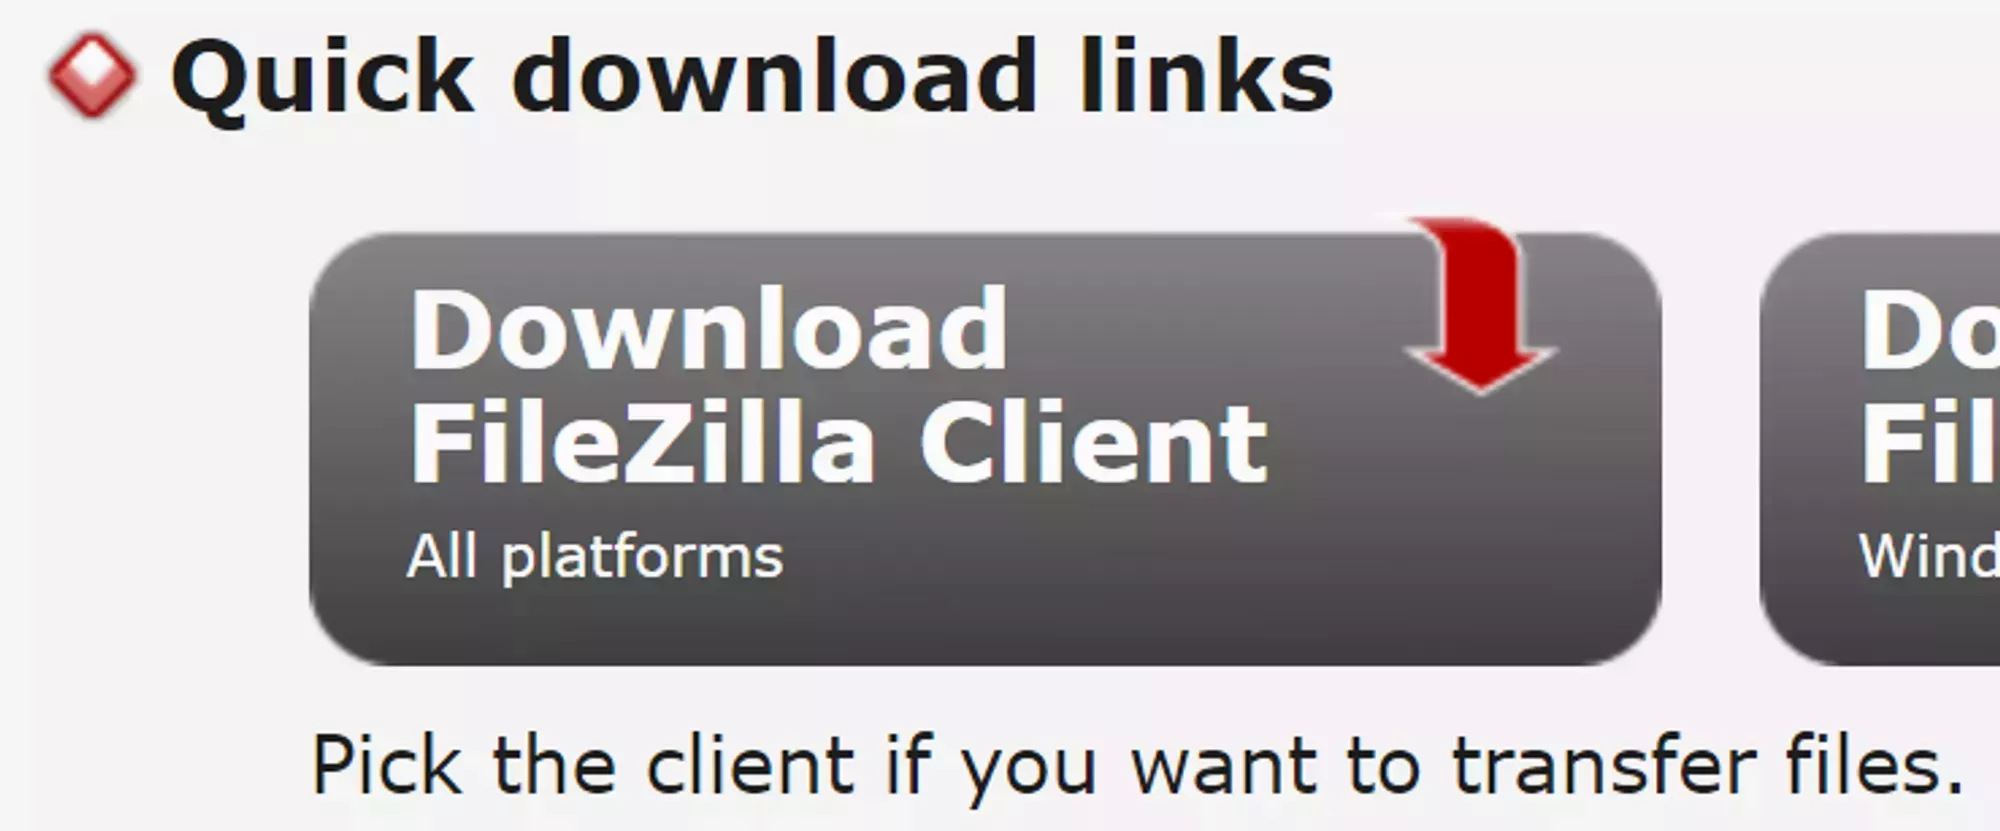 The download button located on the FileZilla website